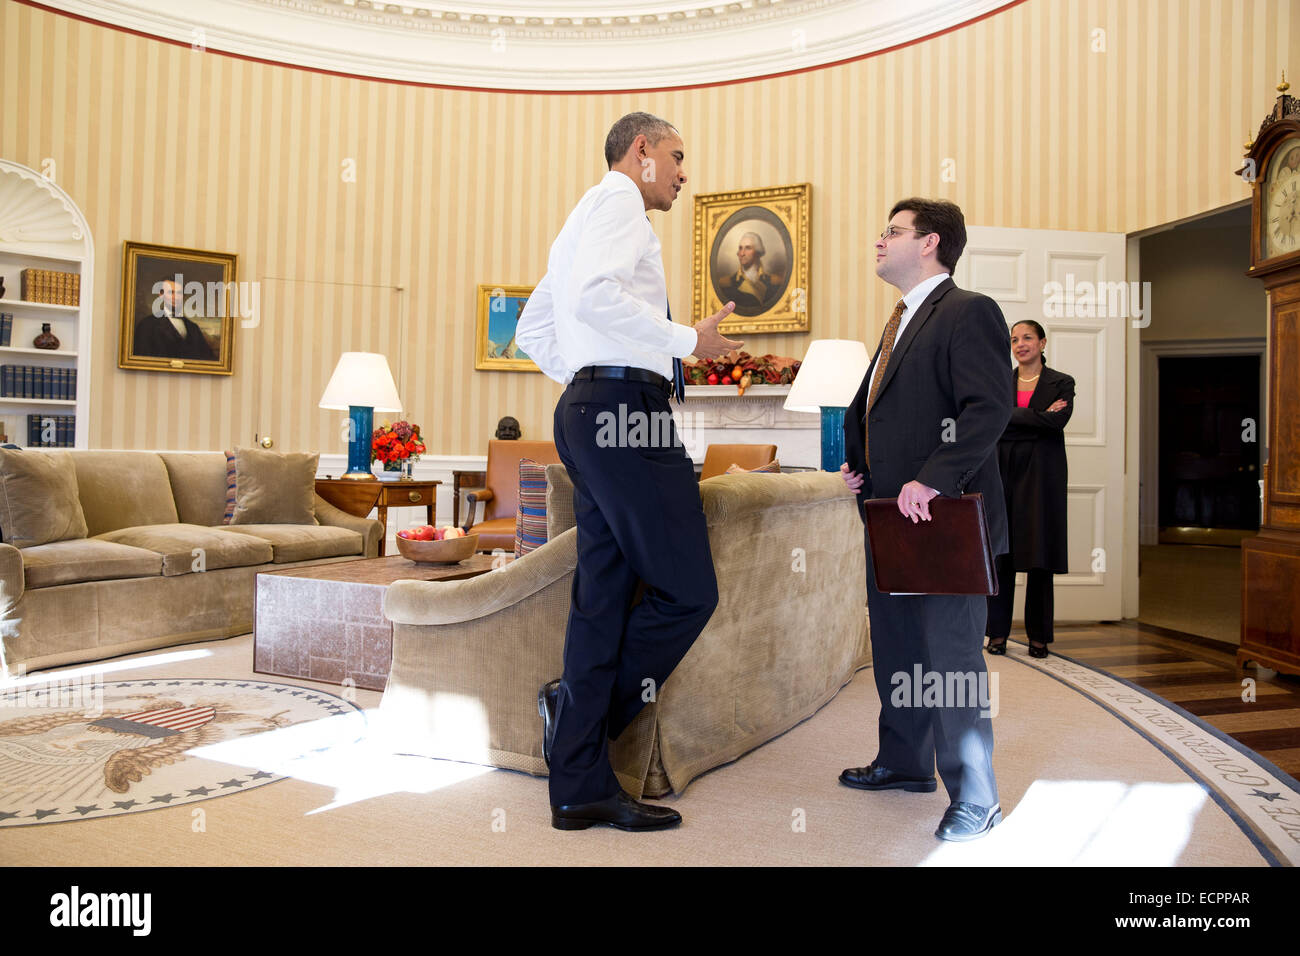 Washington DC, USA. 17th Dec, 2014. Obama delivered a statement on Cuba and the release of American Alan Gross. 17th Dec, 2014. Photo released by the White House shows U.S. President Barack Obama (L) talking with Ricardo Zuniga, senior director for the western hemisphere affairs, after Obama delivered a statement on Cuba and the release of American Alan Gross, in the Oval Office of the White House in Washington Dec. 17, 2014. Credit:  Official White House Photo/Pete Souza/Xinhua/Alamy Live News Stock Photo